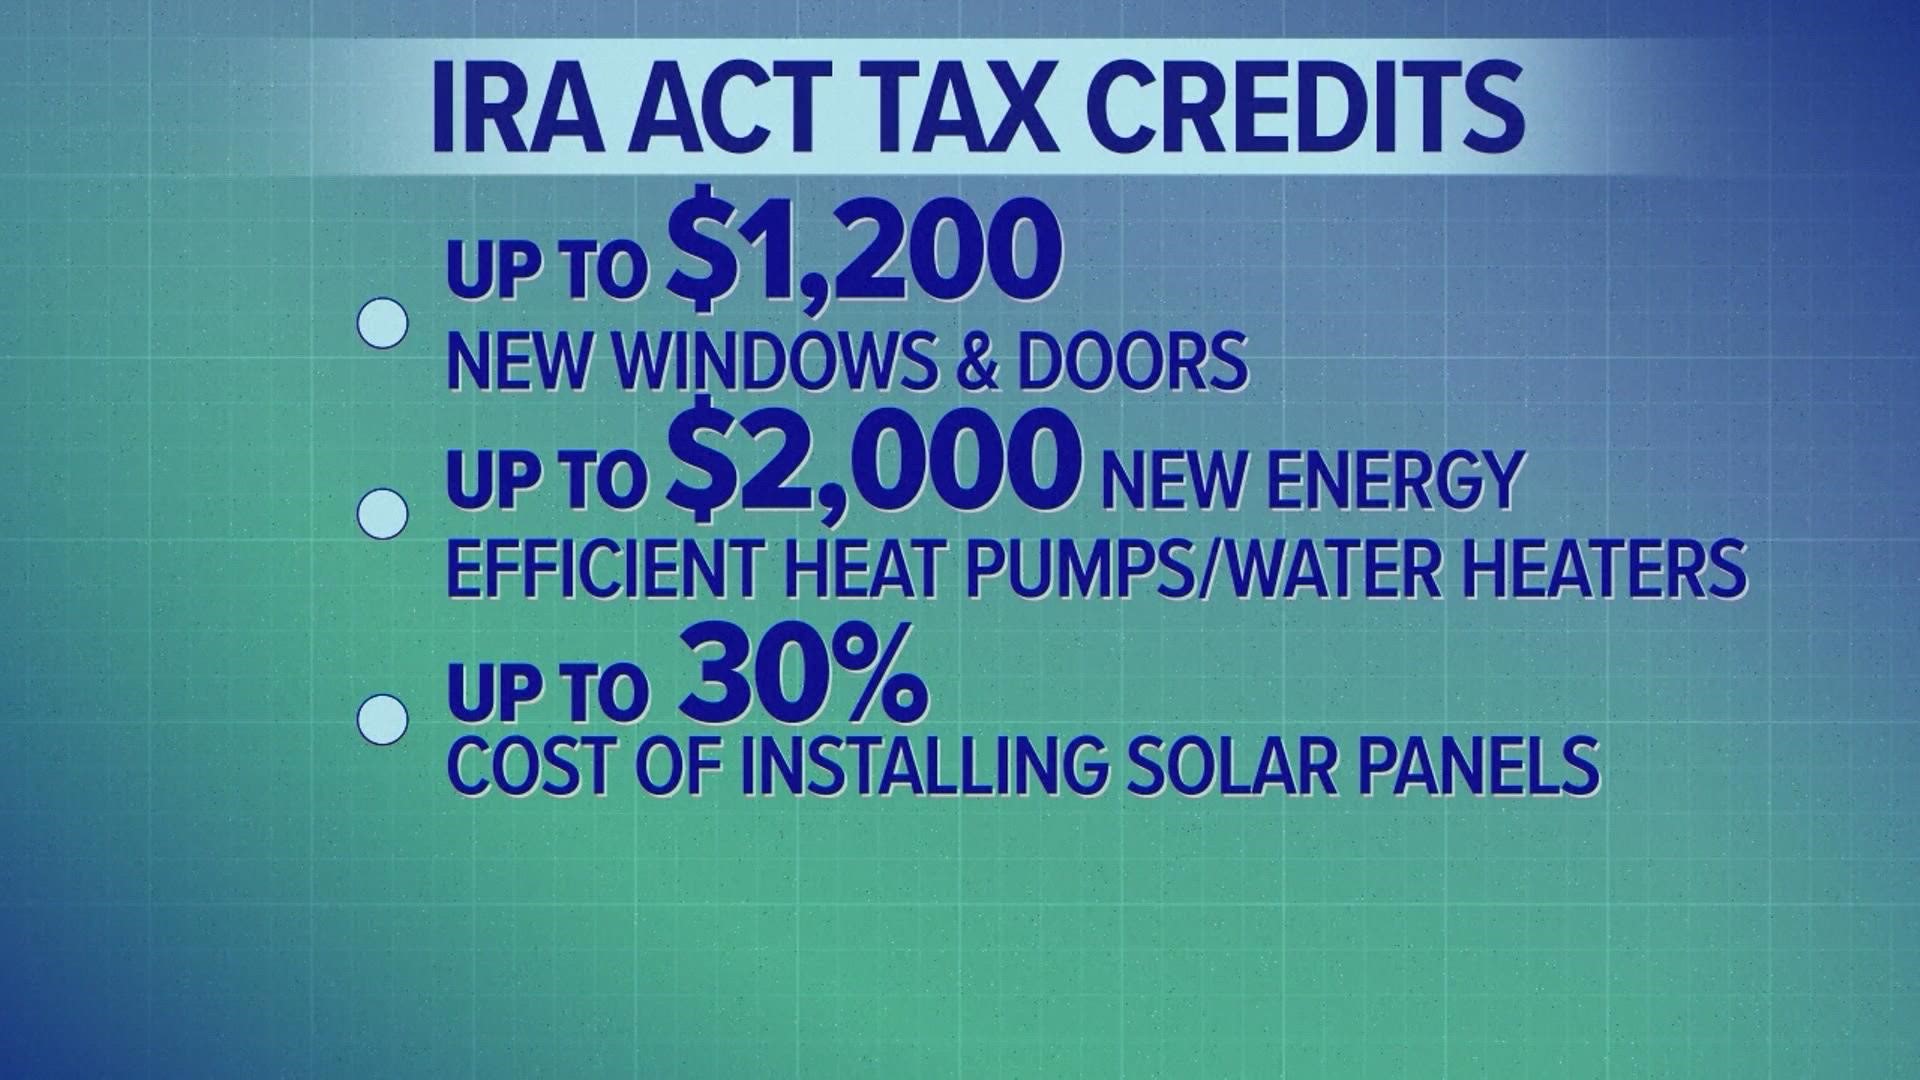 inflation-reduction-act-increases-home-energy-tax-credits-wfaa